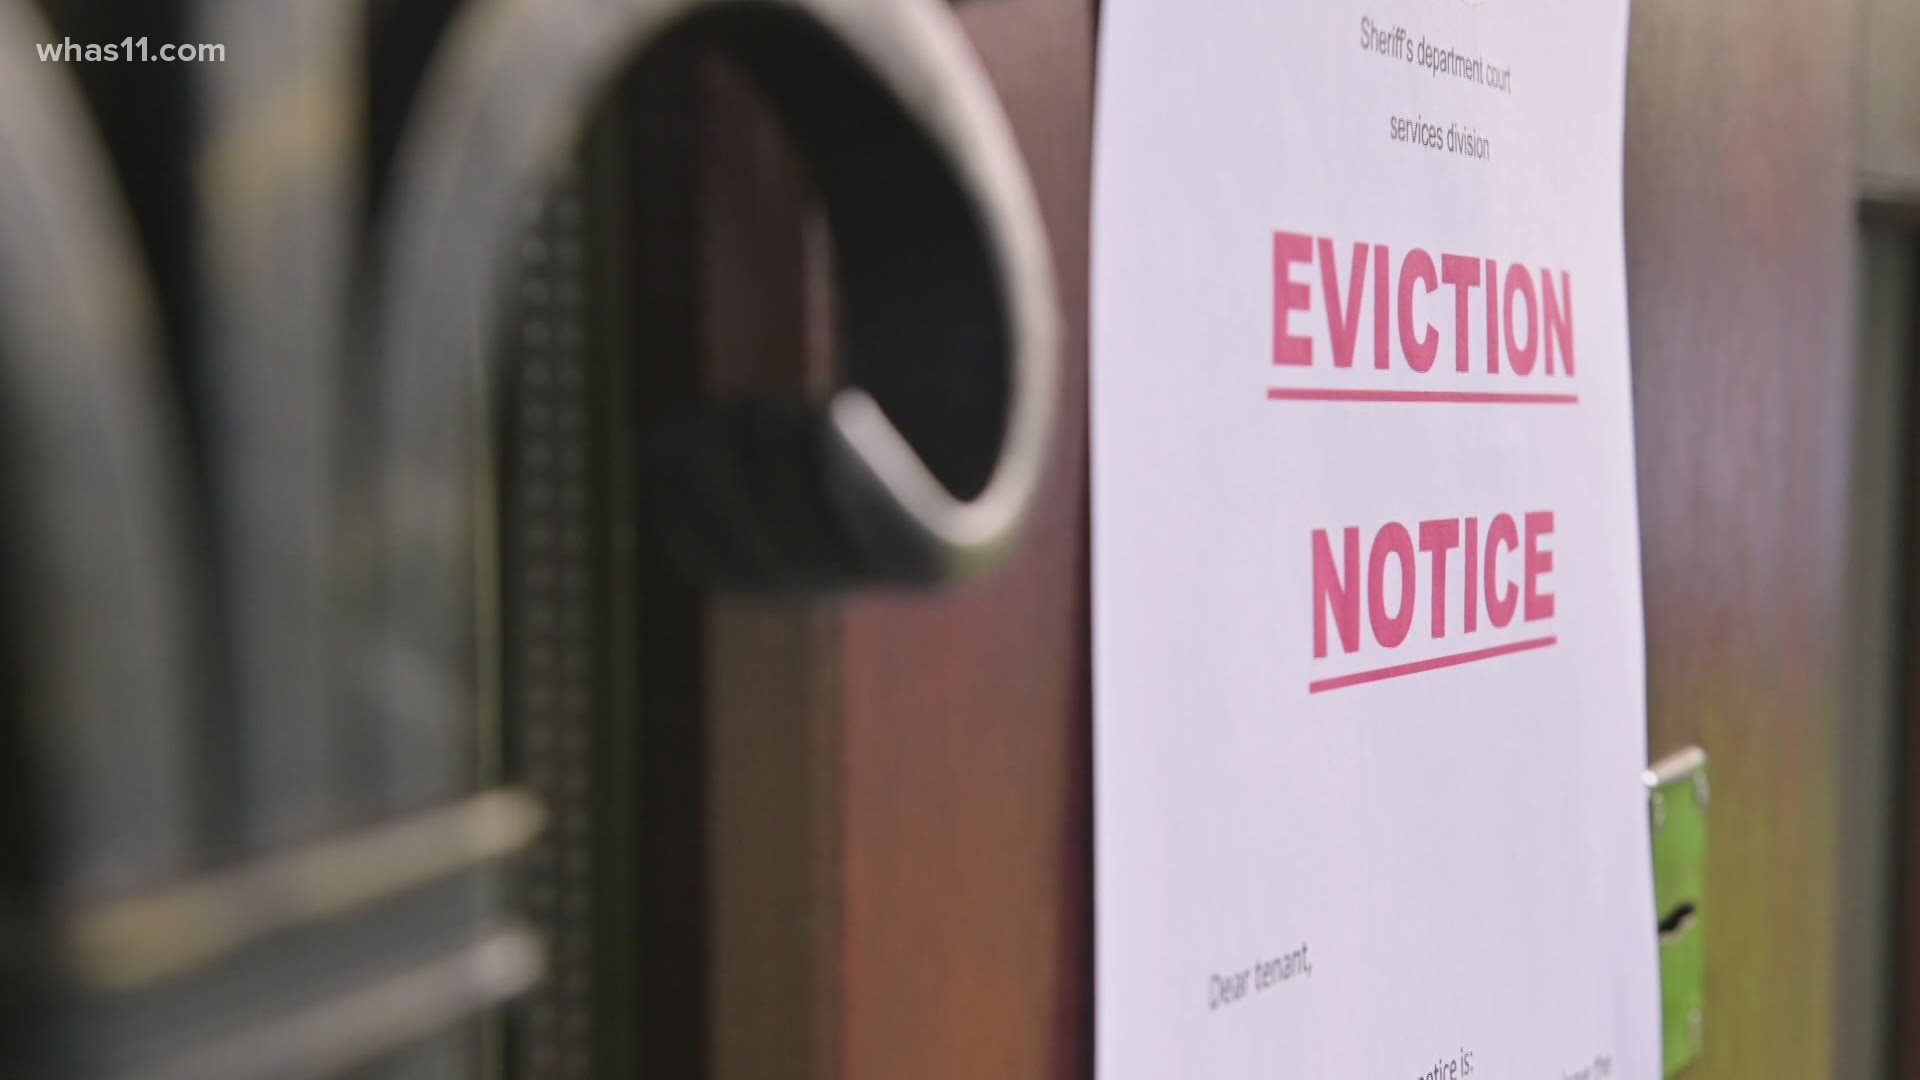 There is a looming deadline of June 30, that is when the CDC's eviction moratorium will end leaving Americans at risk of eviction to find aid on their own.